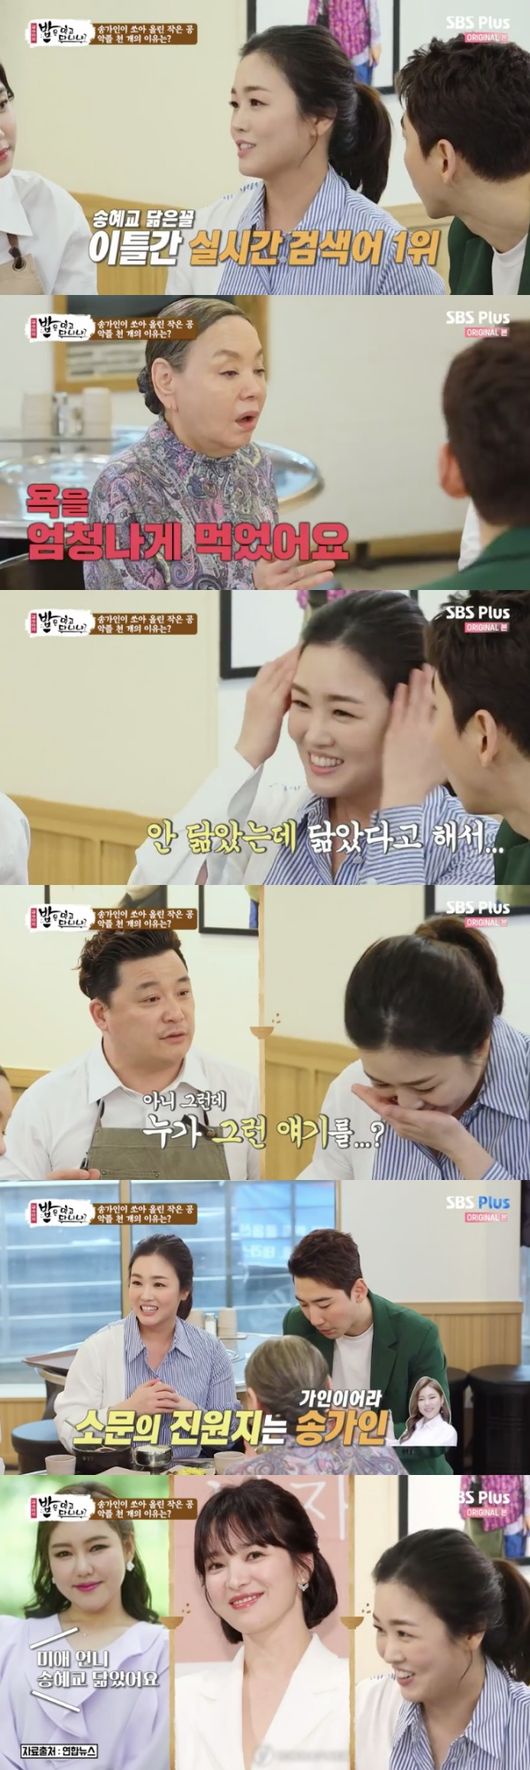 Trot singer The Miami has revealed a story called Song Hye-kyo resemblance in Bob is eating.In the SBS Plus entertainment program Do You Eat Rice? (hereinafter Eat it), which aired on the night of the 27th, The Miami and Younggi appeared as guests.As soon as Kim Soo-mi of Eat it saw The Miami, he was surprised that Song Hye-kyo is on his face. Song Hye-kyo is passing through.Yoon Jung-soo also raised the beauty of The Miami, saying, Did not you call it Song Hye-kyo resemblance in other broadcasts?The Miami was not sure what to do with the Song Hye-kyo resemblance remarks.I told him that Song Hye-kyo resembles a song in an entertainment show that Song Gain appeared together, he said. I was in the top spot in real-time search for two days after that.Im not like Song Hye-kyo at all, he said, and Ive been cursed. He even said, There are more than 1,000 Flamings after that.I do not resemble it, but I pretend to resemble it. He repeatedly denied the Song Hye-kyo resemblance .So, Younggi added, No, I have a feeling like that for my sister.SBS Plus.